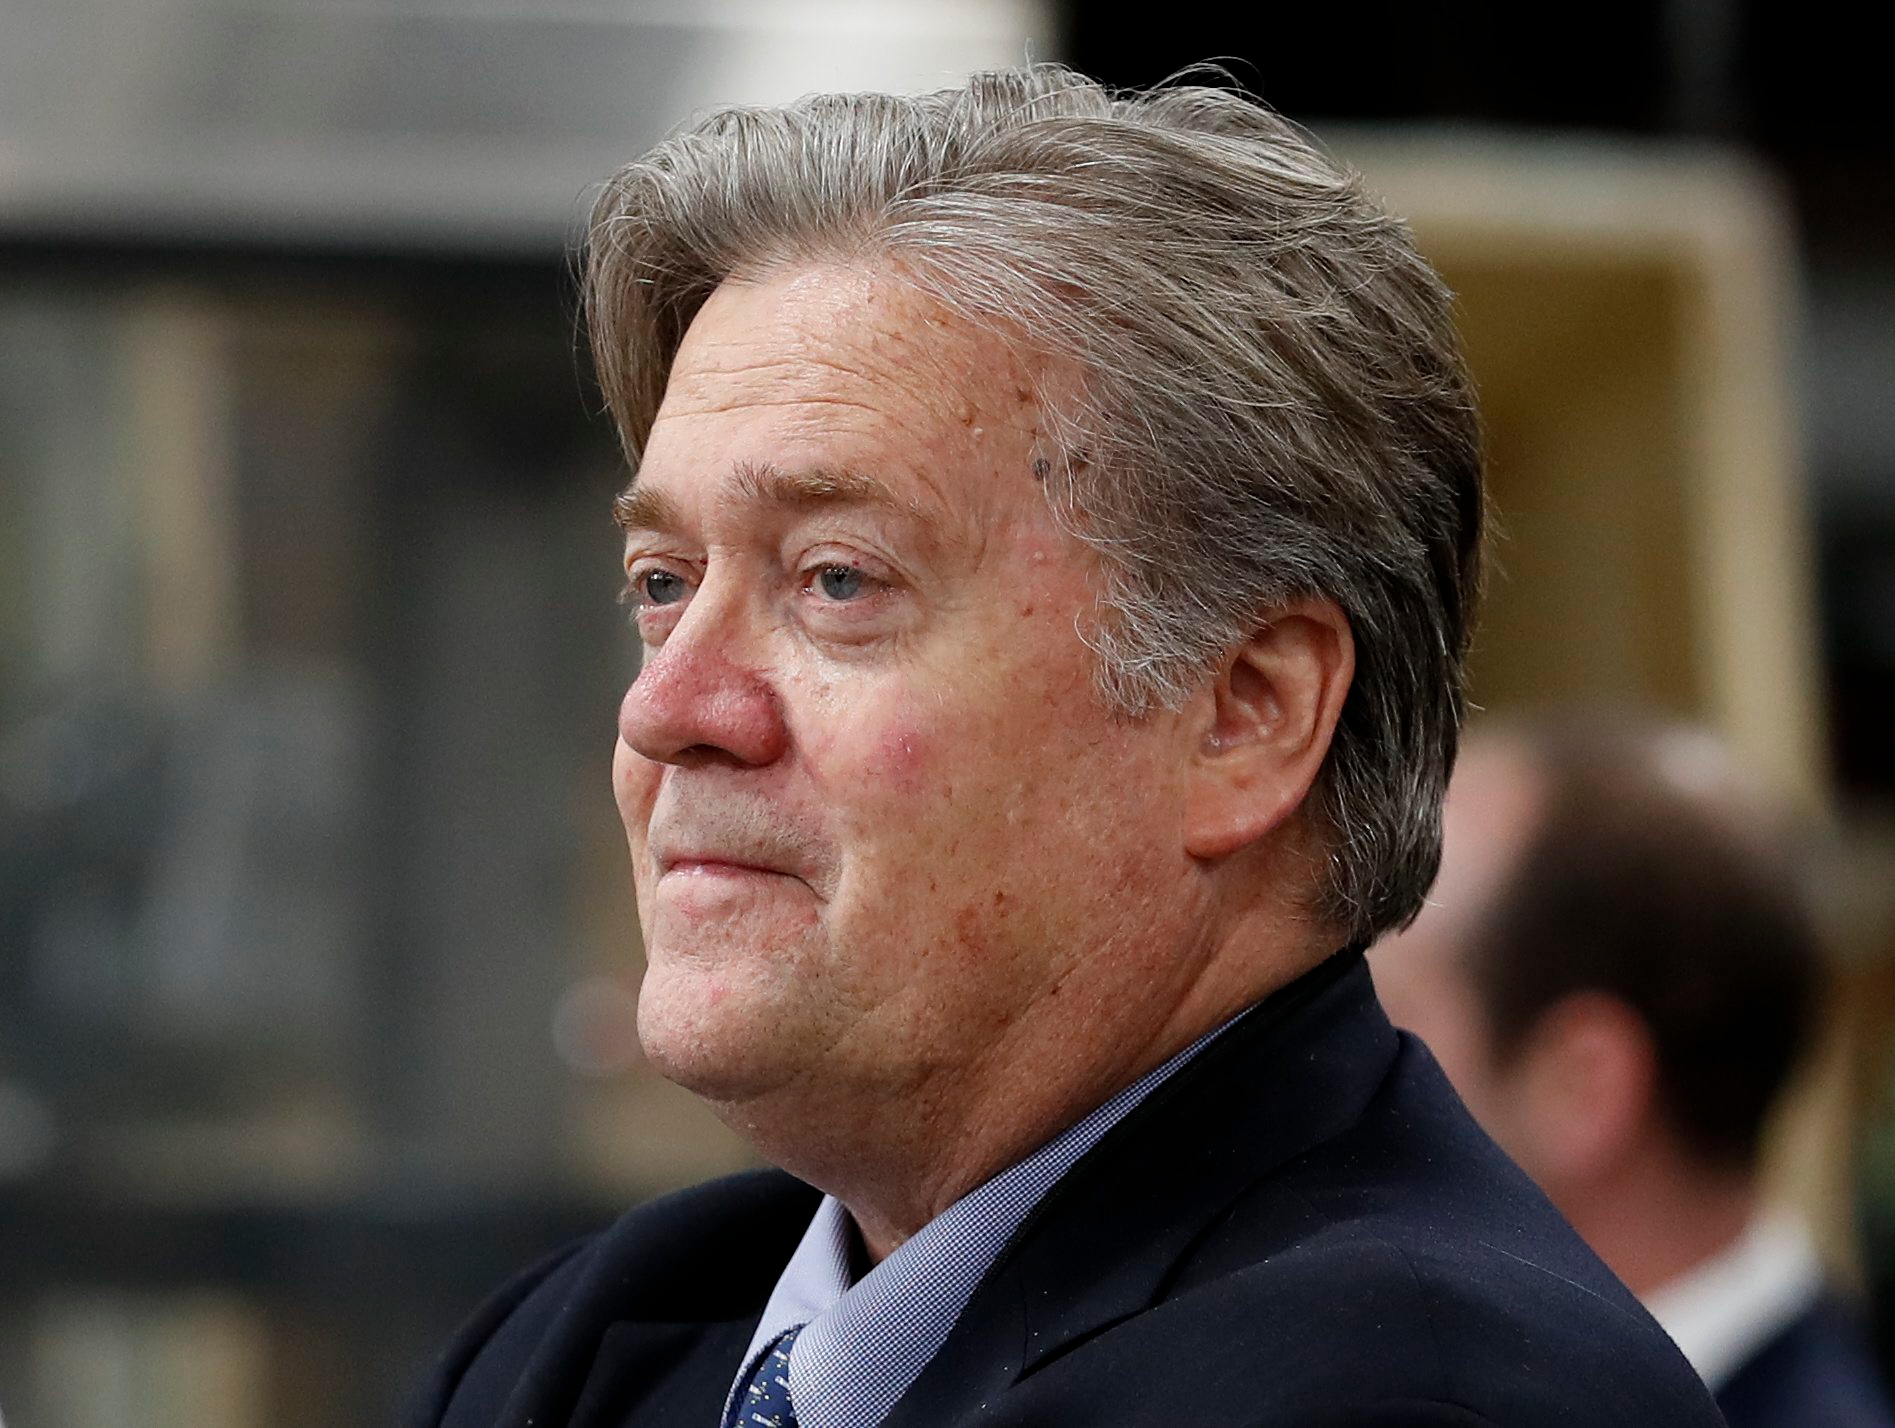 FILE - In this April 29, 2017, file photo, Steve Bannon, chief White House strategist to President Donald Trump is seen in Harrisburg, Pa. According to a source, Bannon is leaving White House post. (AP Photo/Carolyn Kaster, File) Trump Bannon